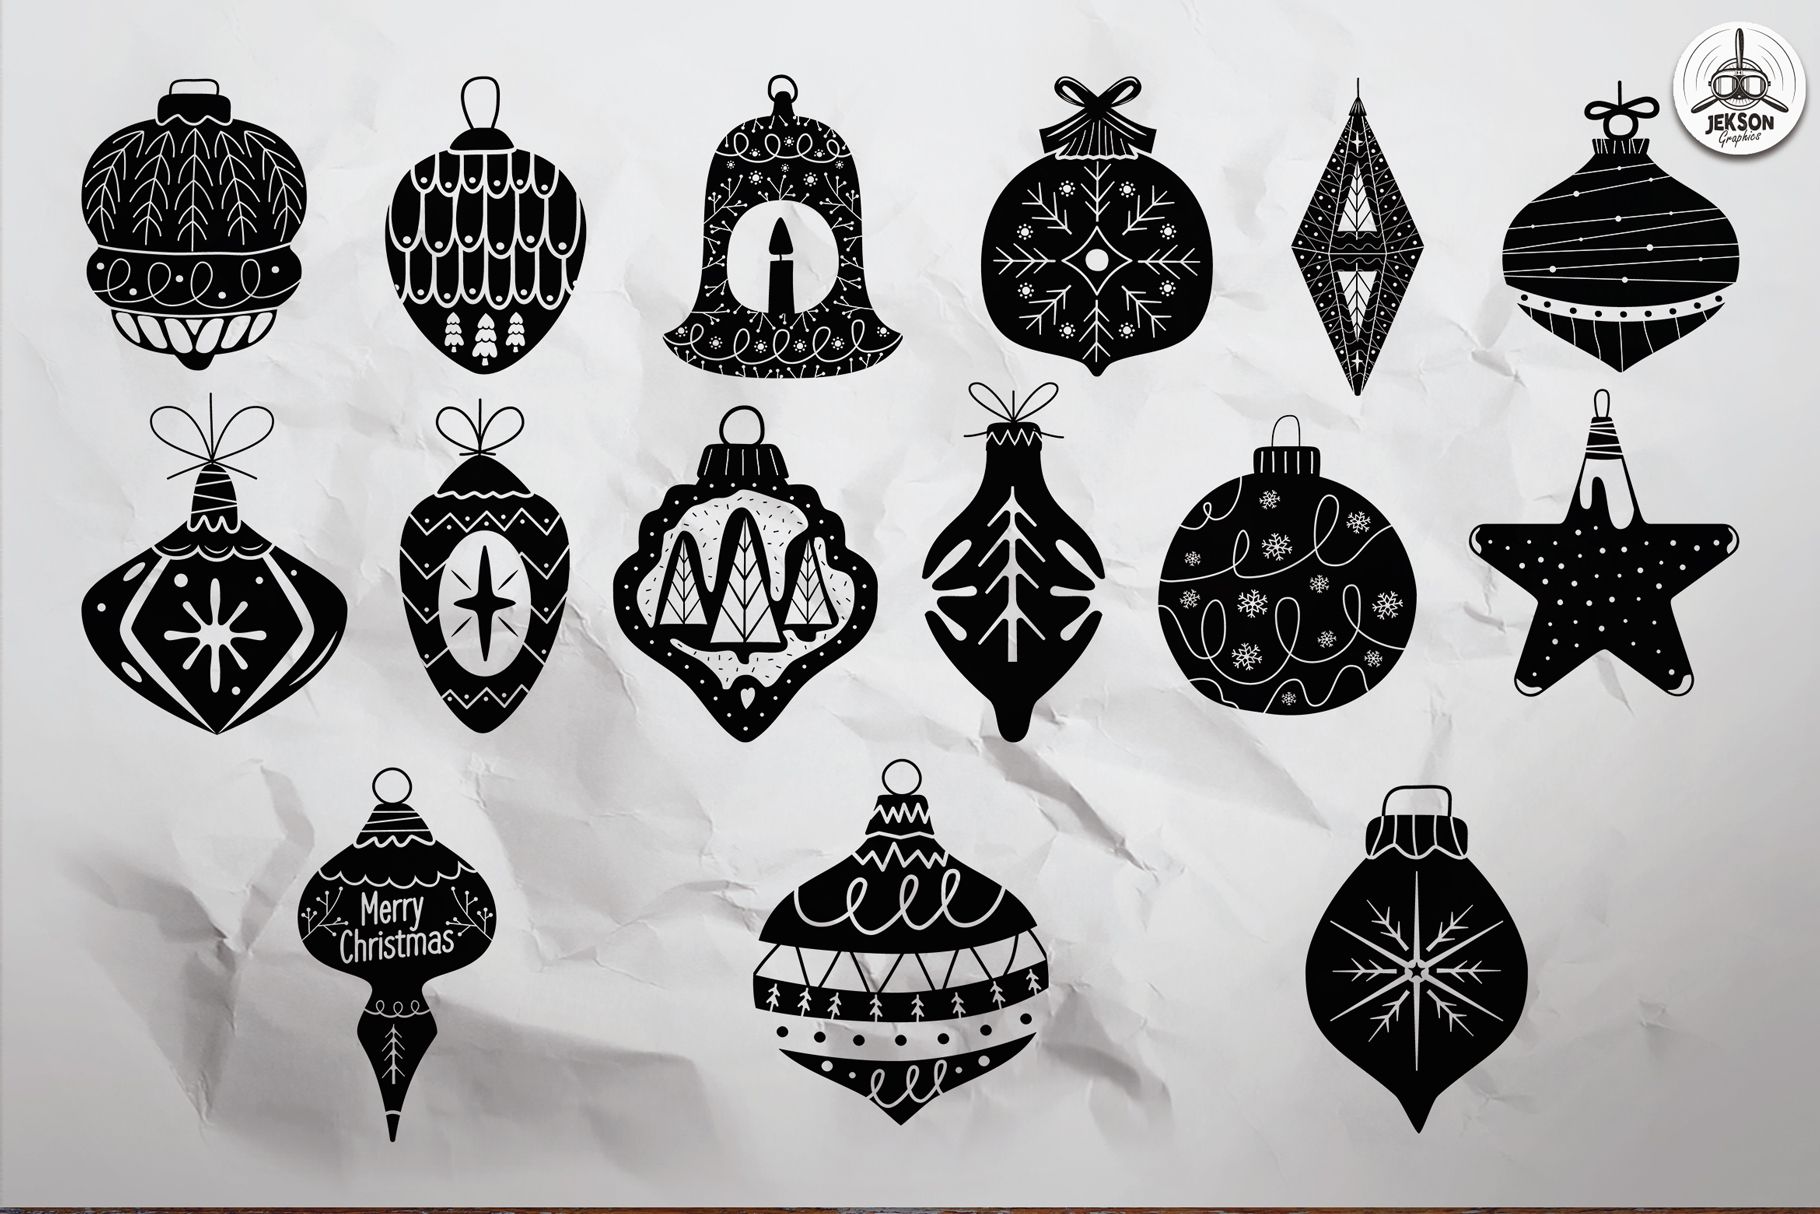 preview of 15 christmas toys set in black silhouette style against old paper 497